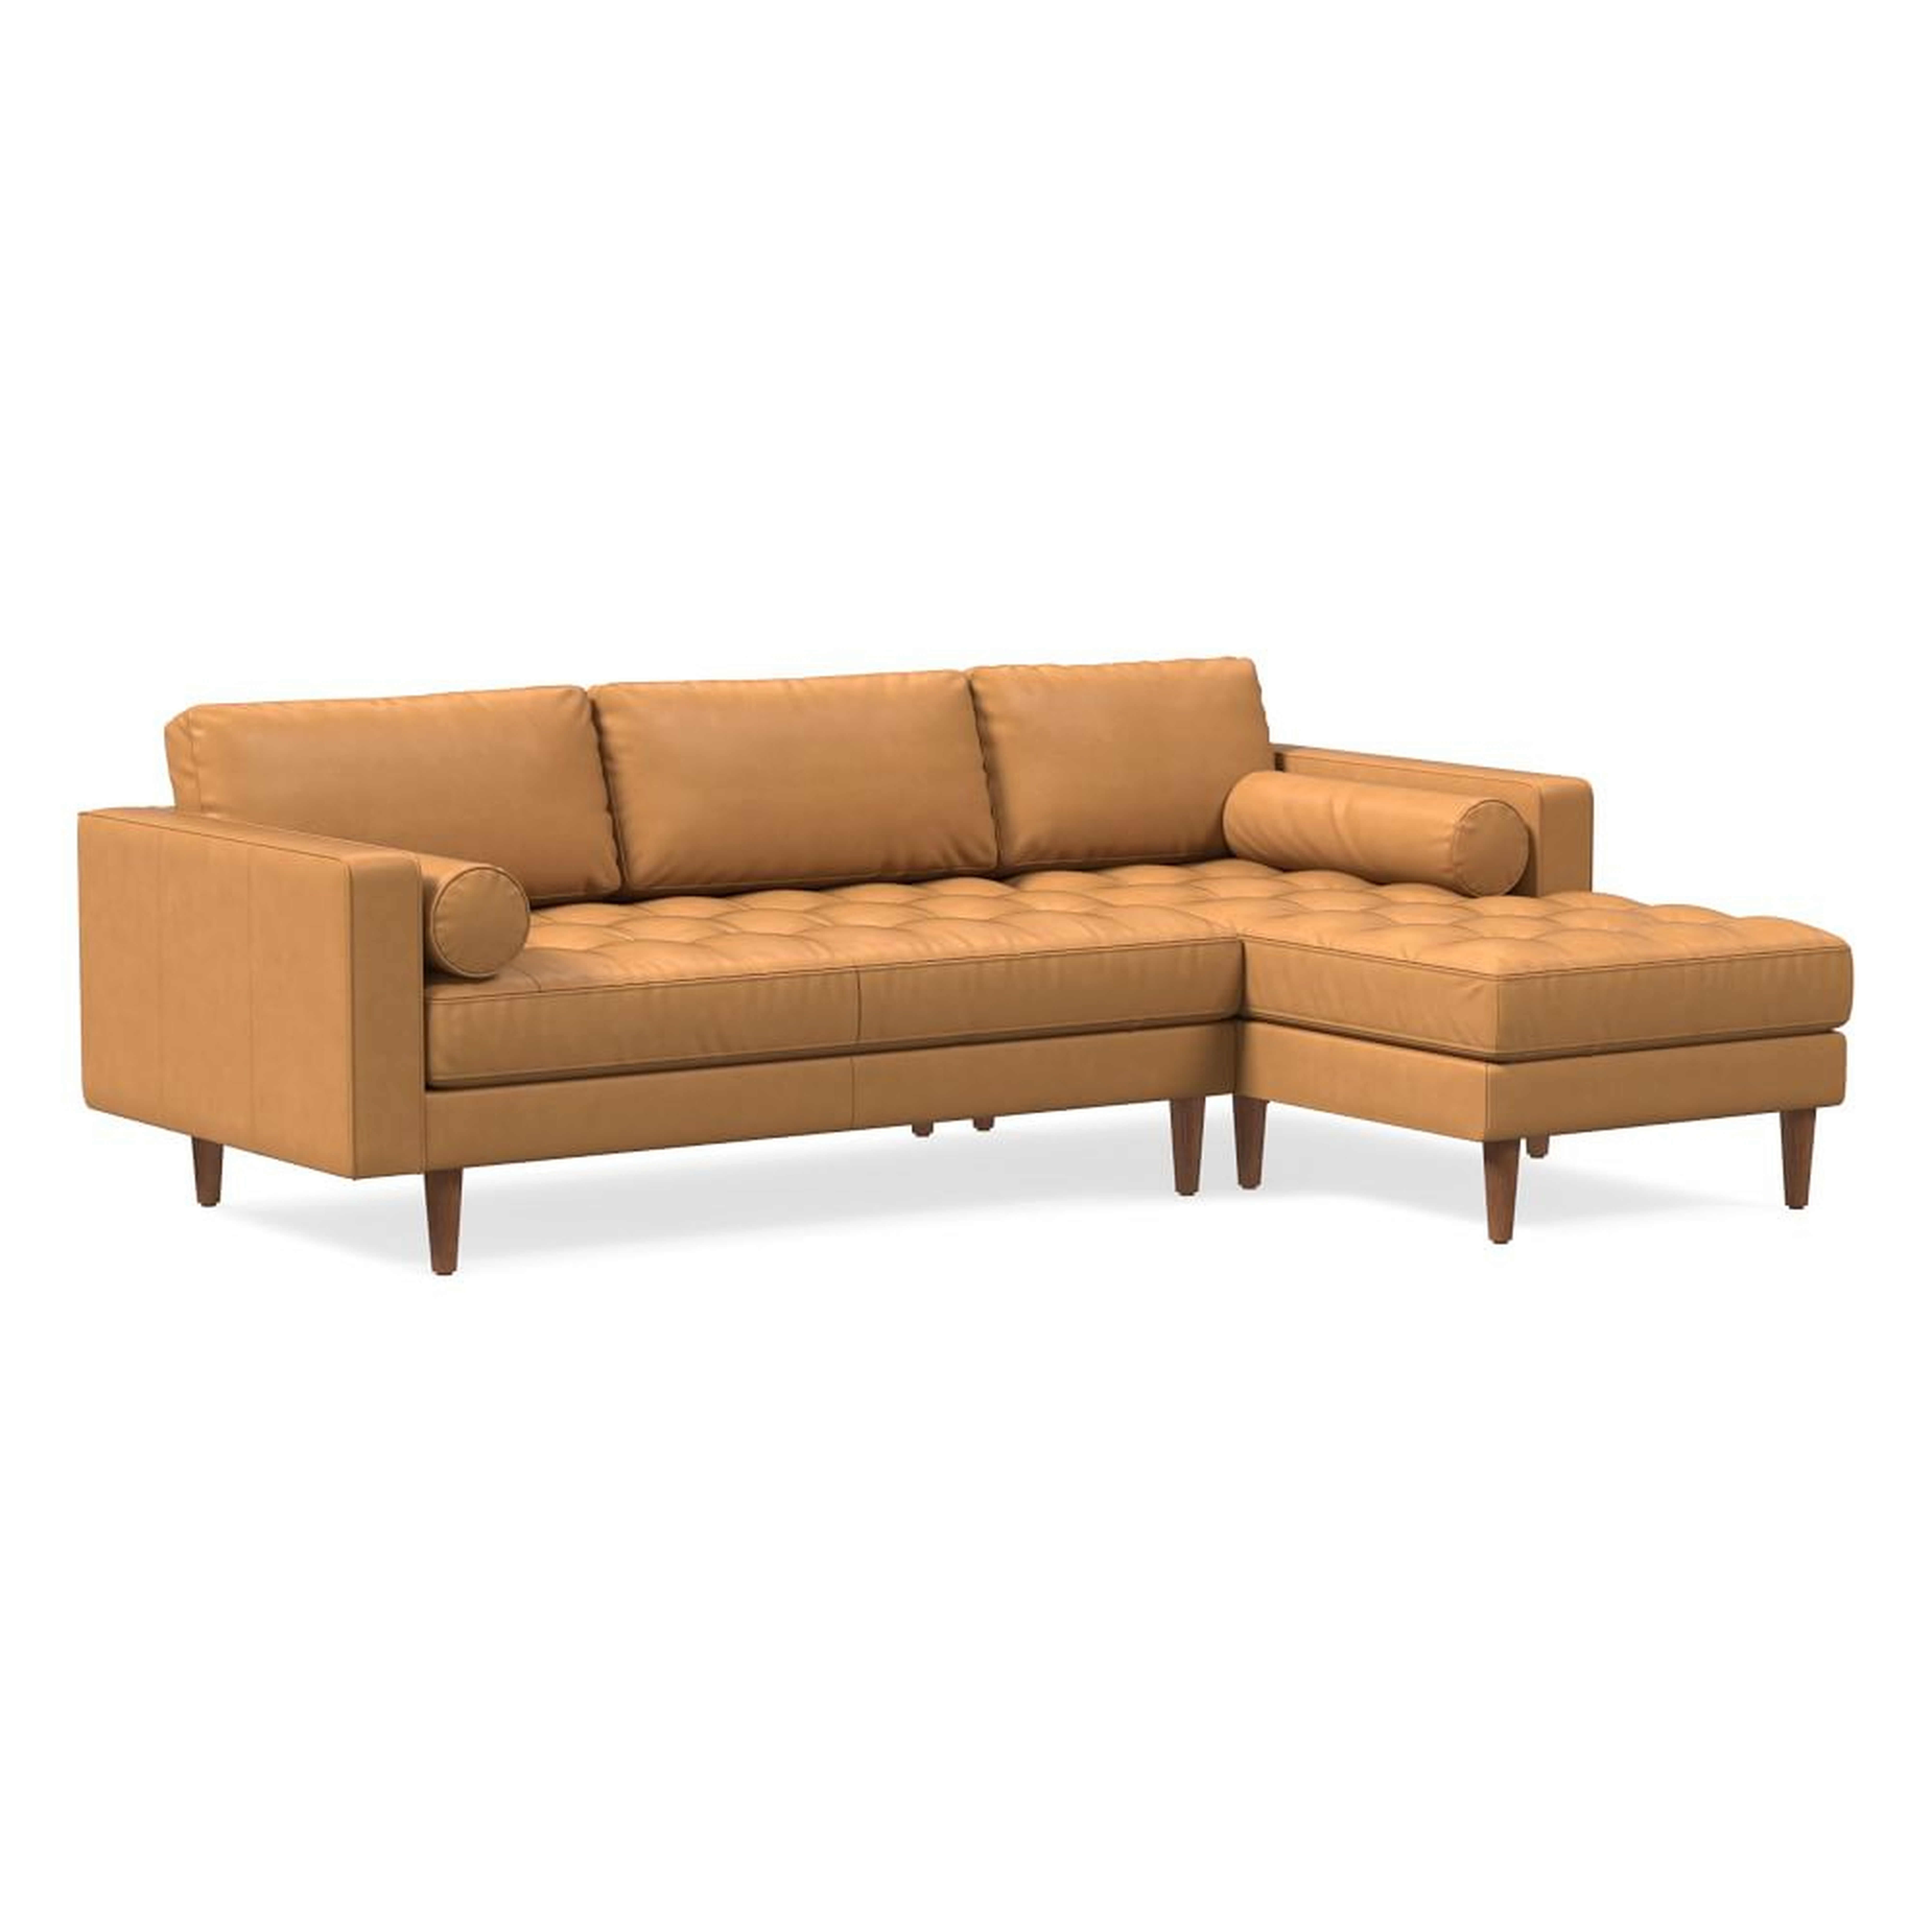 Dennes 102" Right 2-Piece Chaise Sectional, Chalk Leather, Tan, Walnut - West Elm